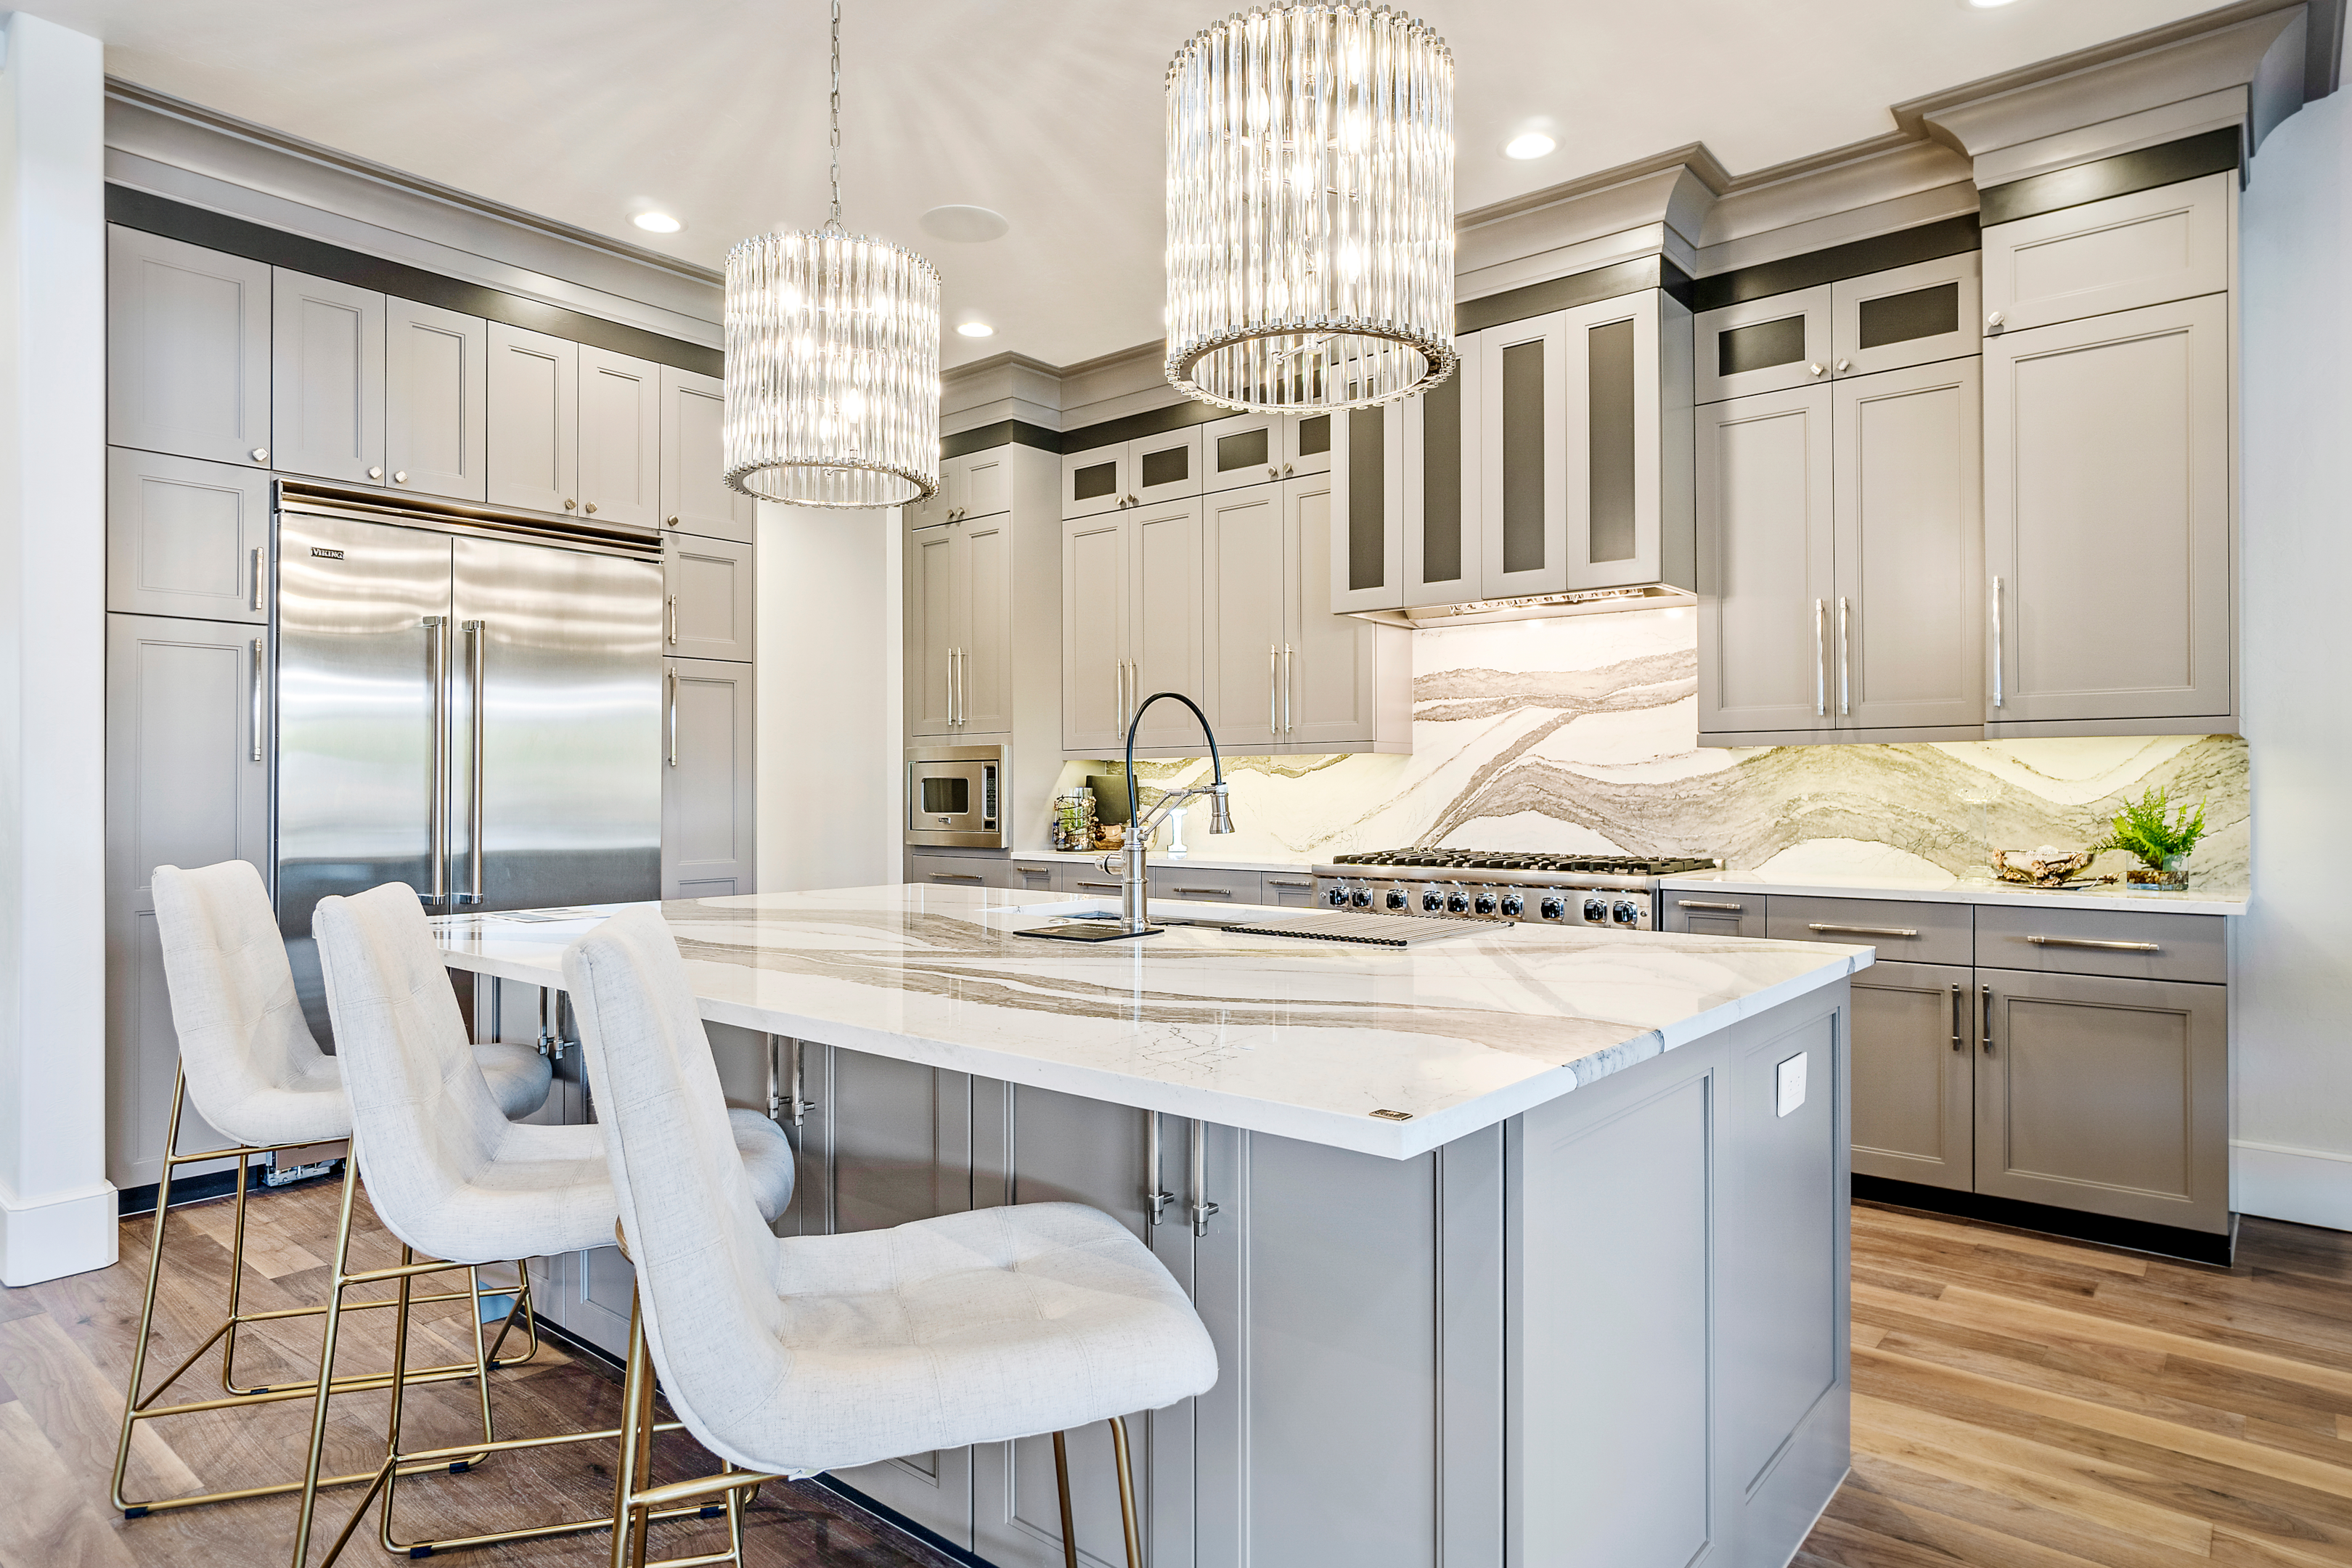 Substance and style in luxury kitchens